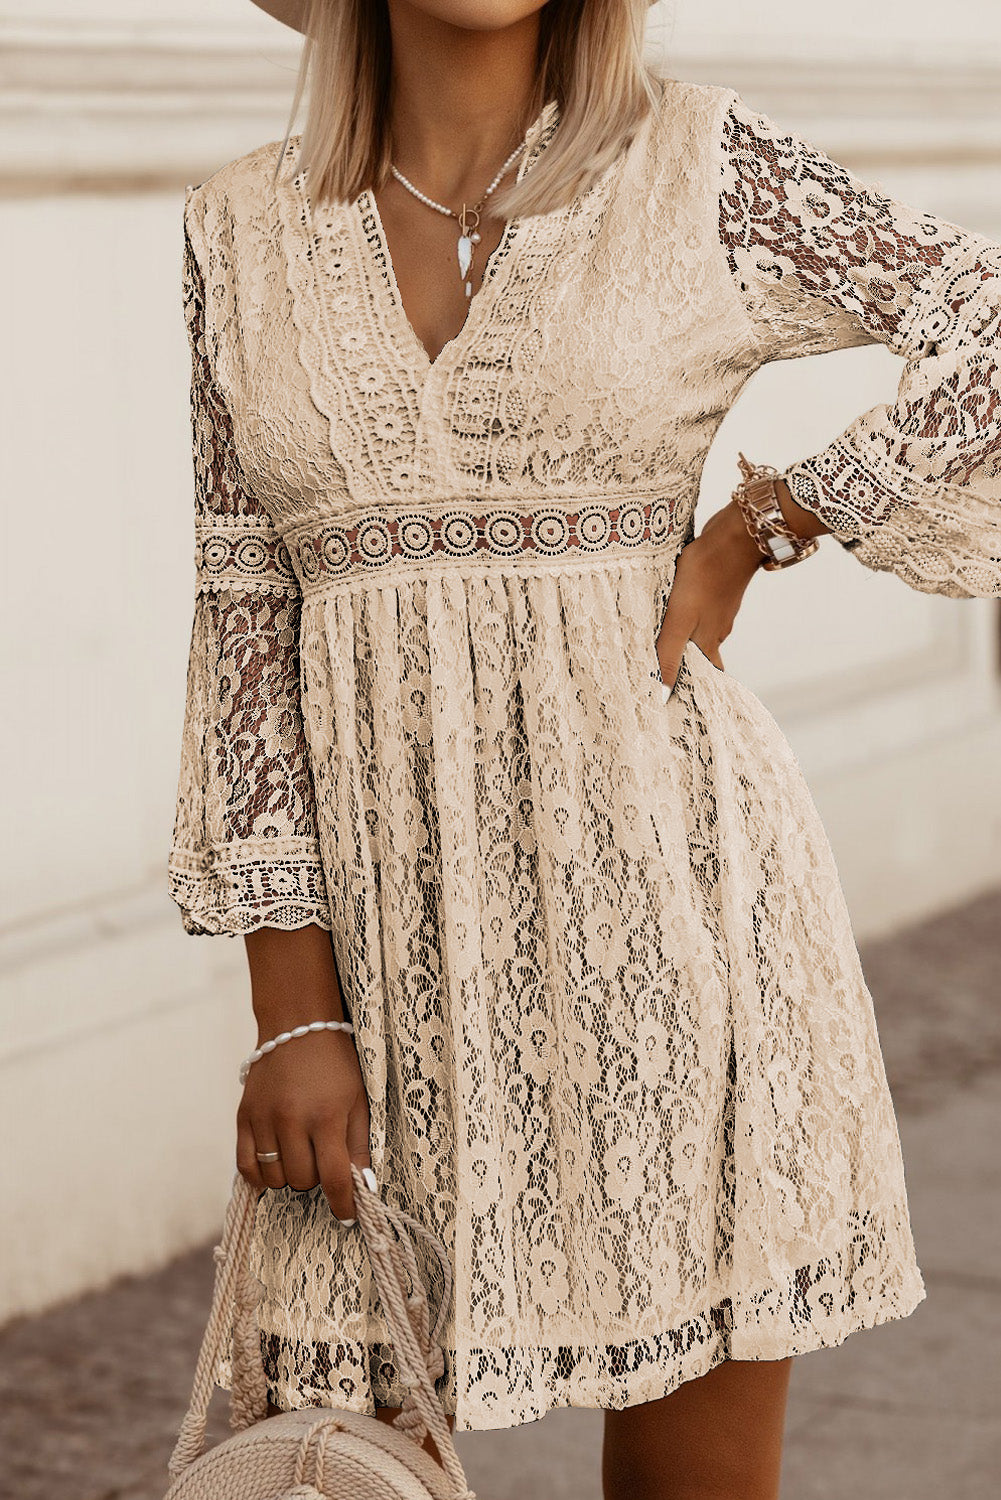 Elegant Lace V-Neck Dress with three-quarter sleeves, perfect for any stylish occasion. Comfort meets chic in this timeless piece.